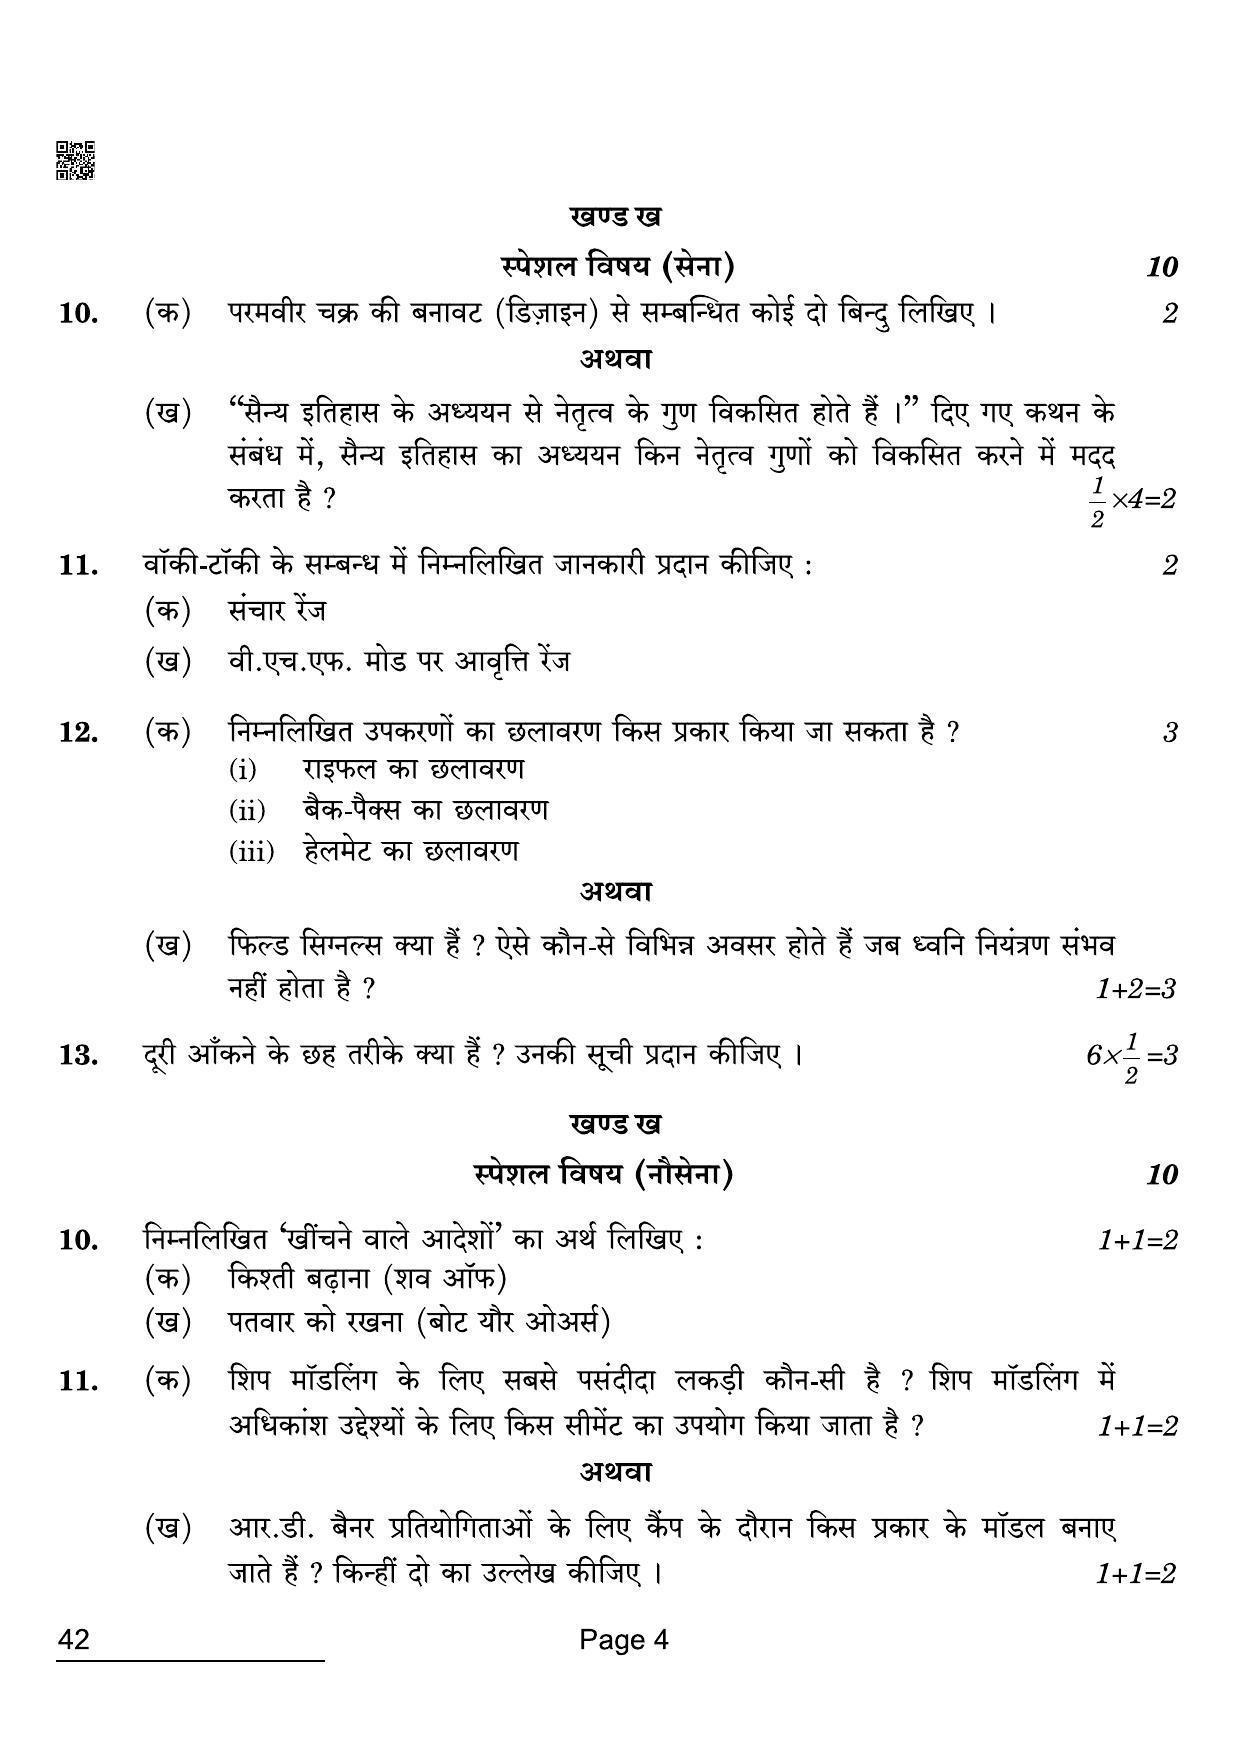 CBSE Class 12 42 NCC 2022 Compartment Question Paper - Page 4